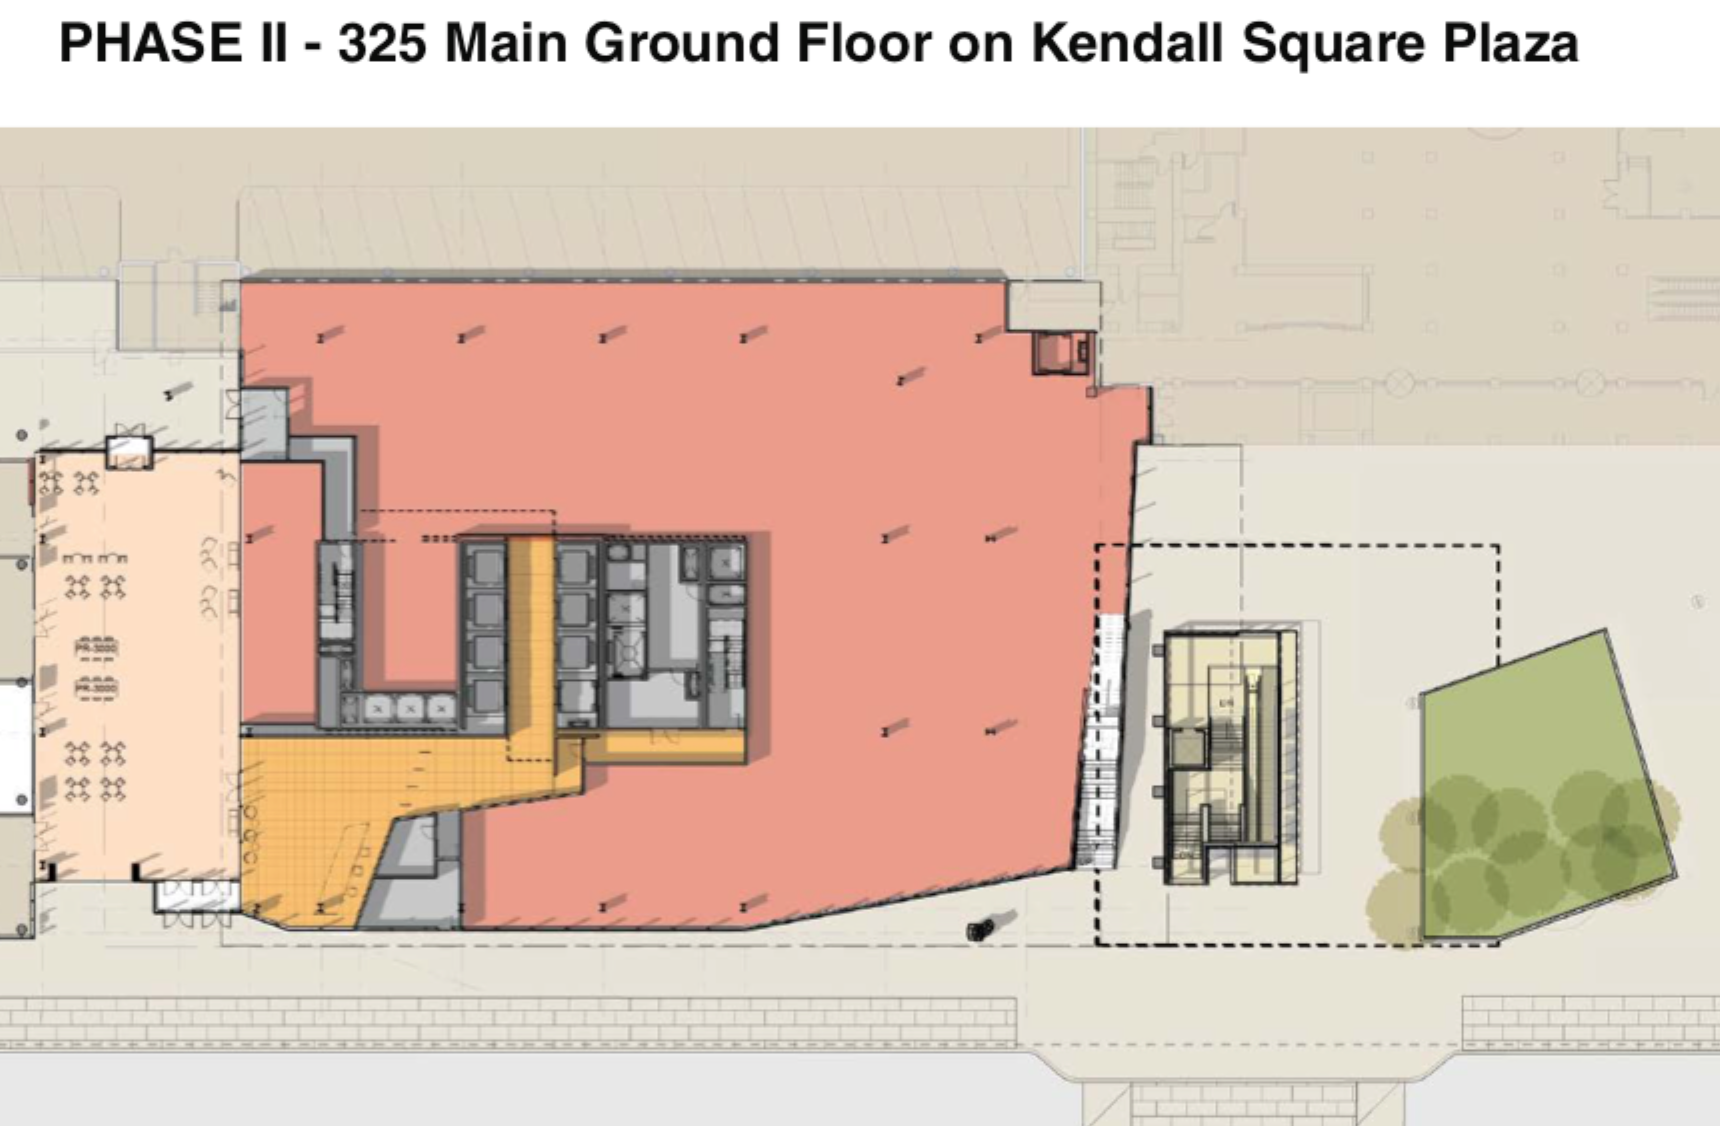  325 Main Street Ground Floor layout plans and connection to Kendall Plaza. 